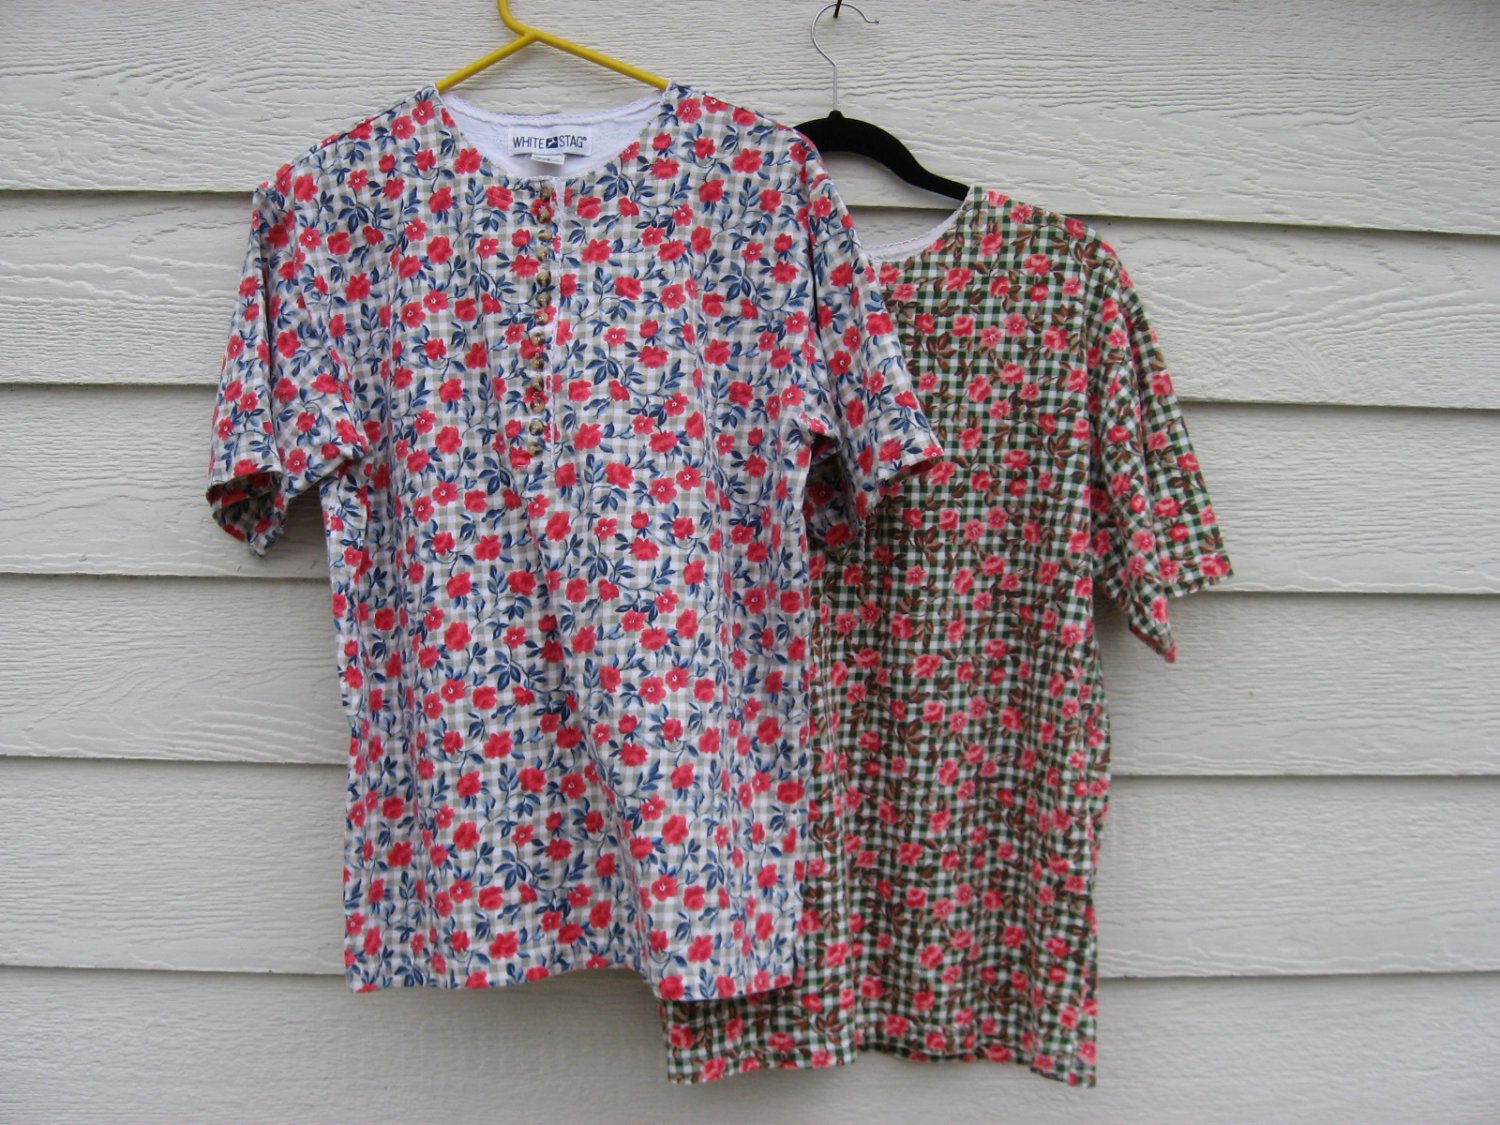 2 White Stag Shirt Medium M 40 Chest Check Gingham Floral Top